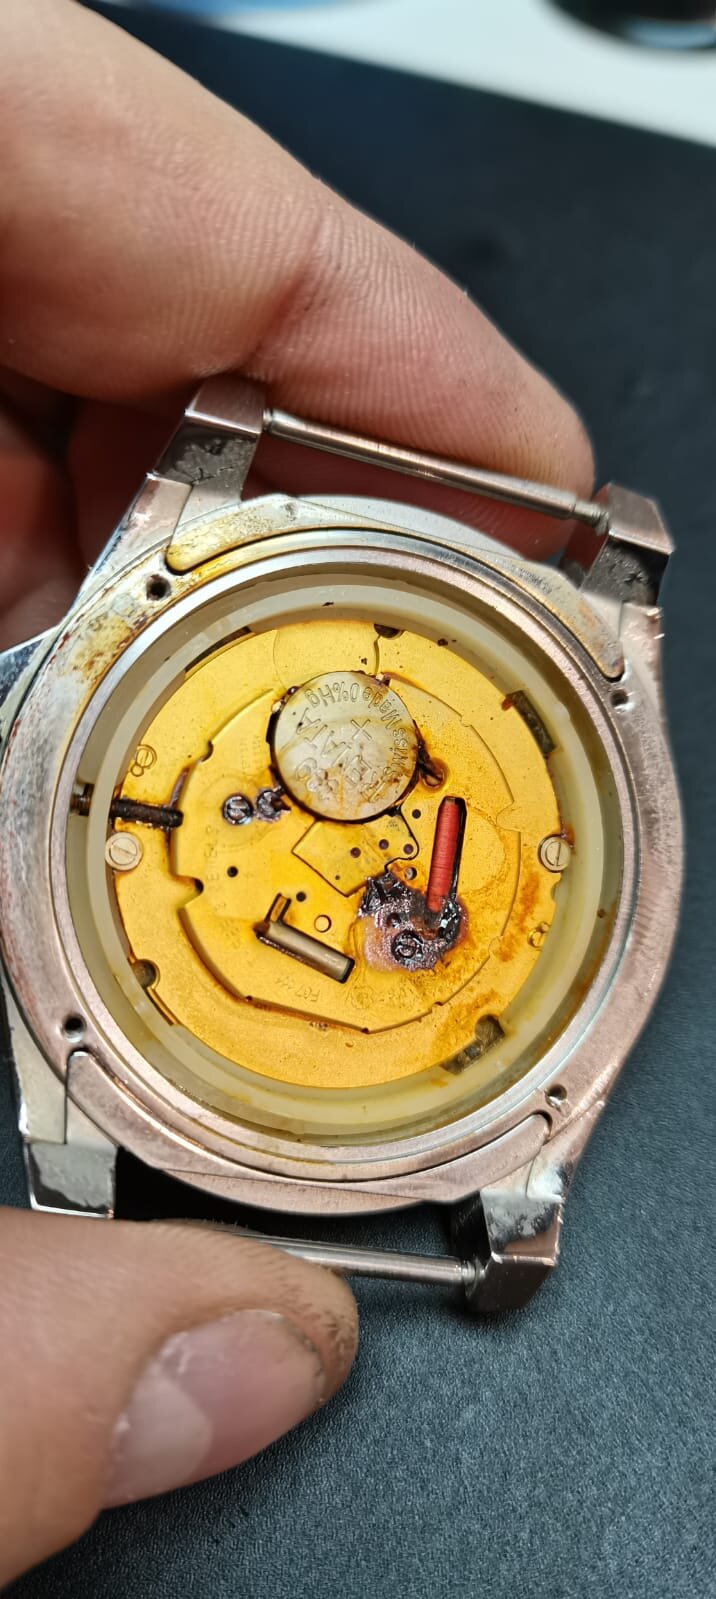 Gucci watch full of water and rusted beyond repair. New movement fitted..jpeg